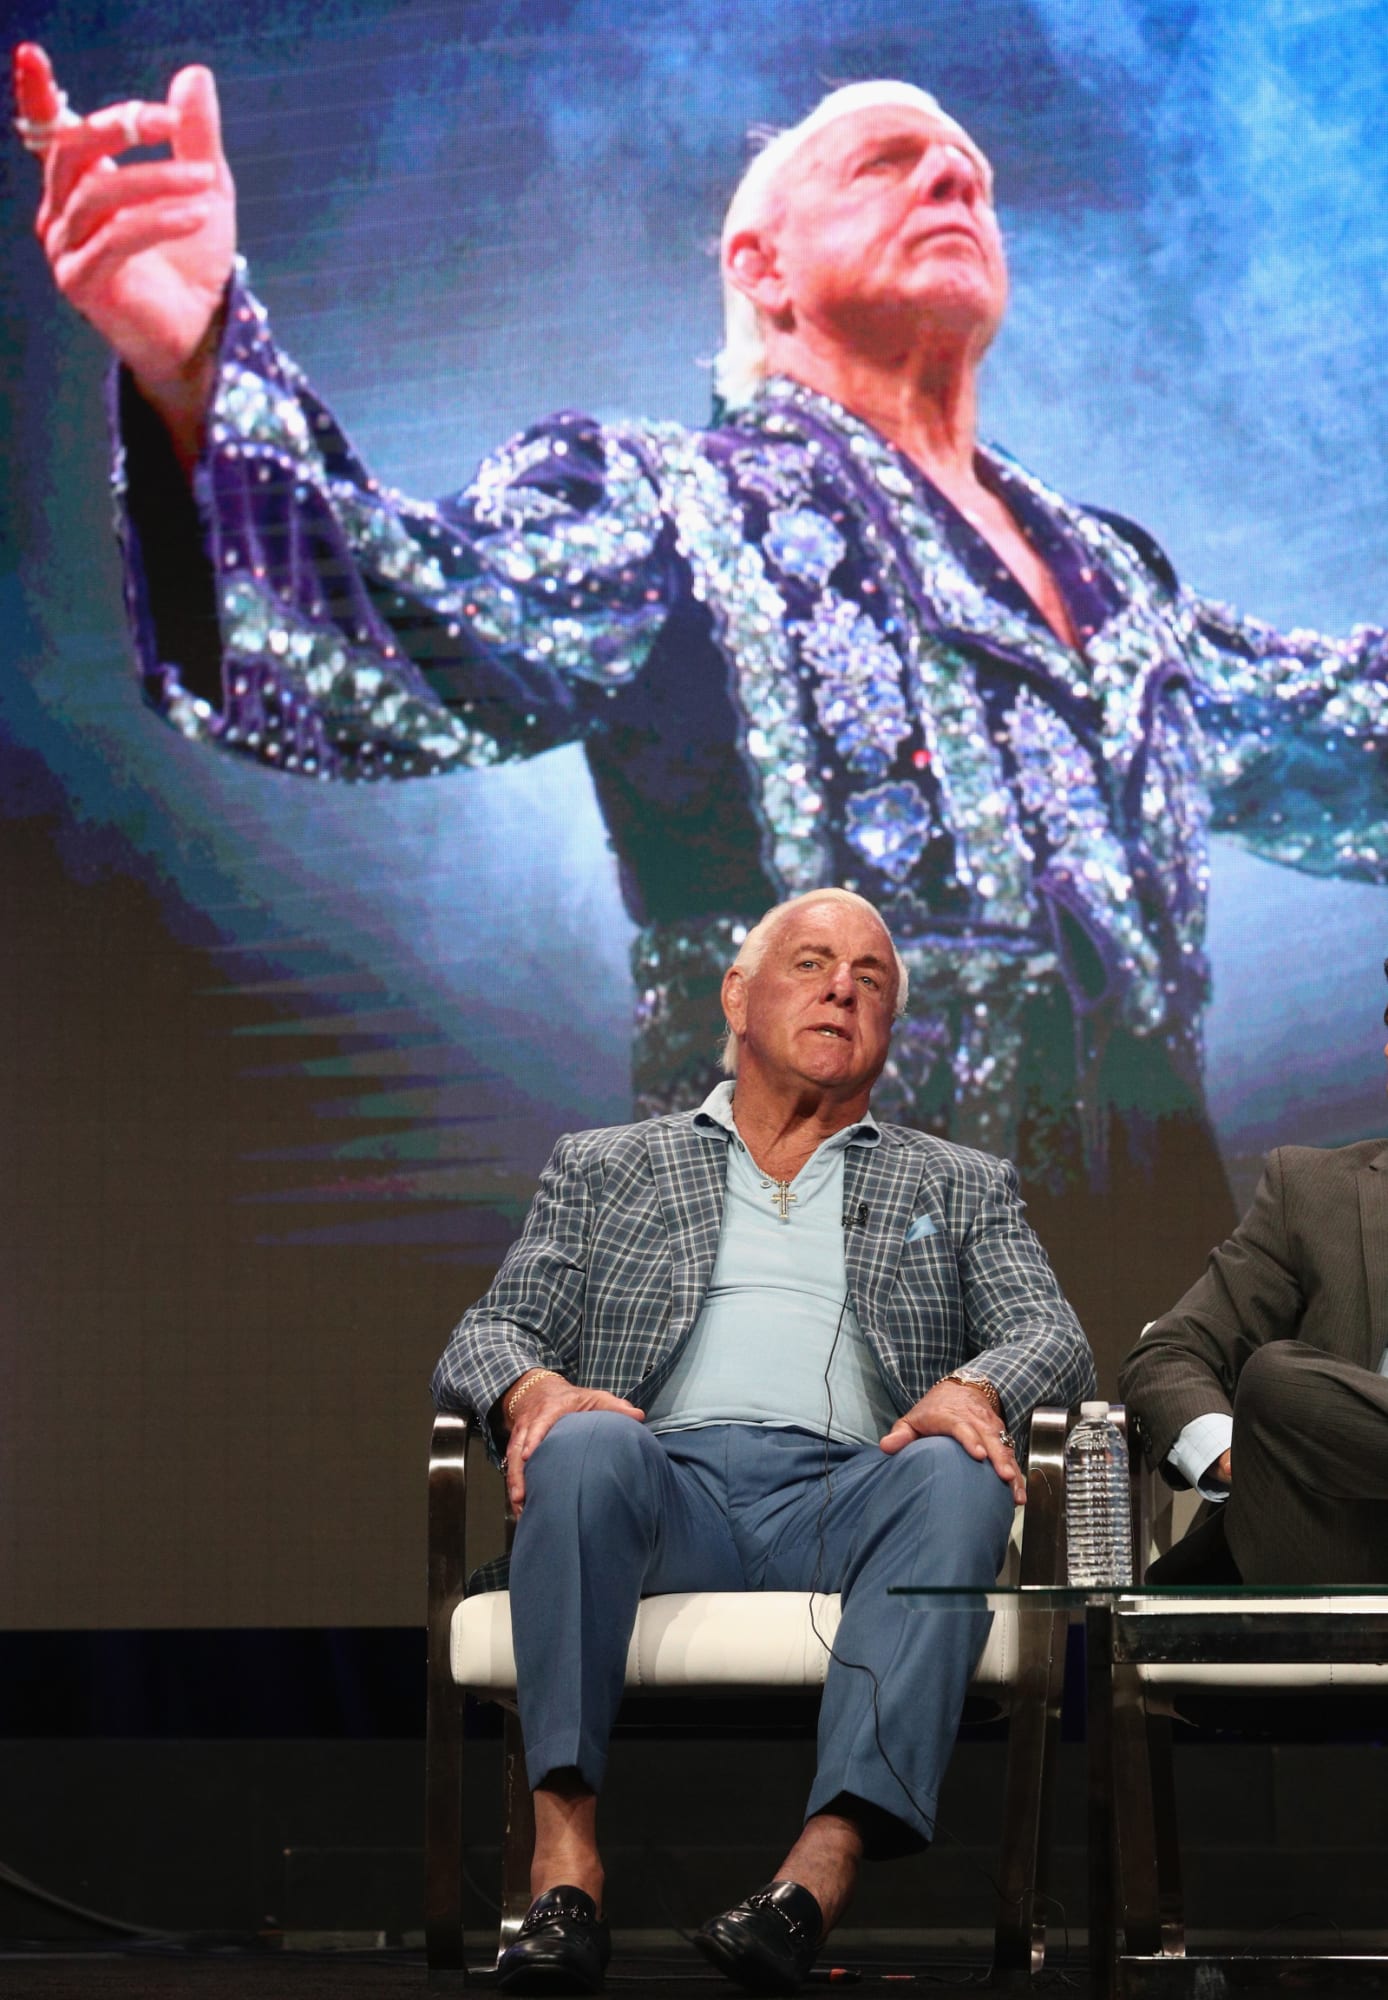 Ric Flair is crazy if he thinks he and Adidas can take